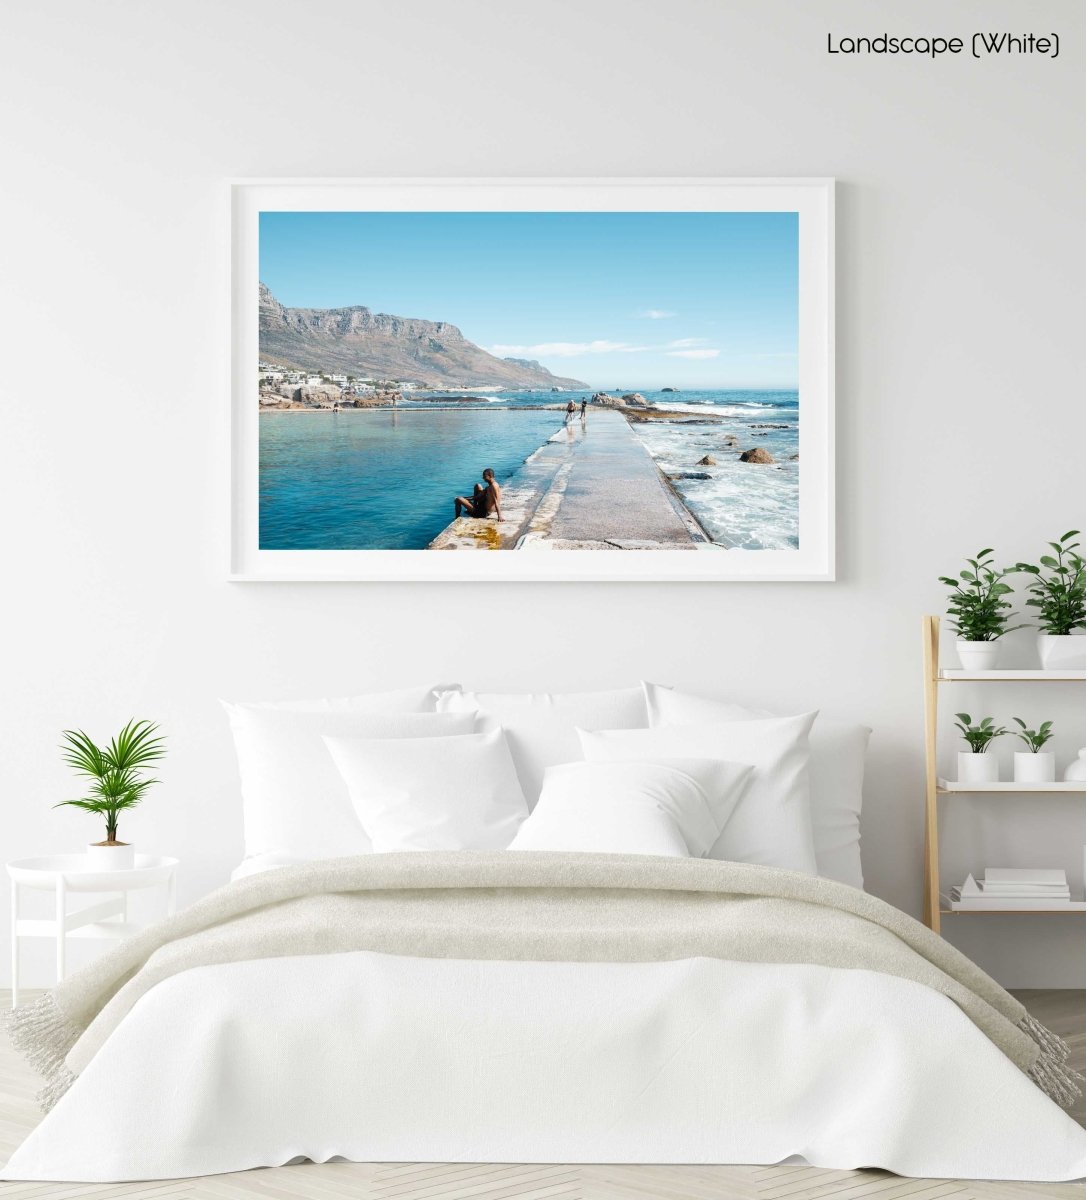 Man sitting along edge of Camps Bay pool with twelve apostles mountains in background in a white fine art frame